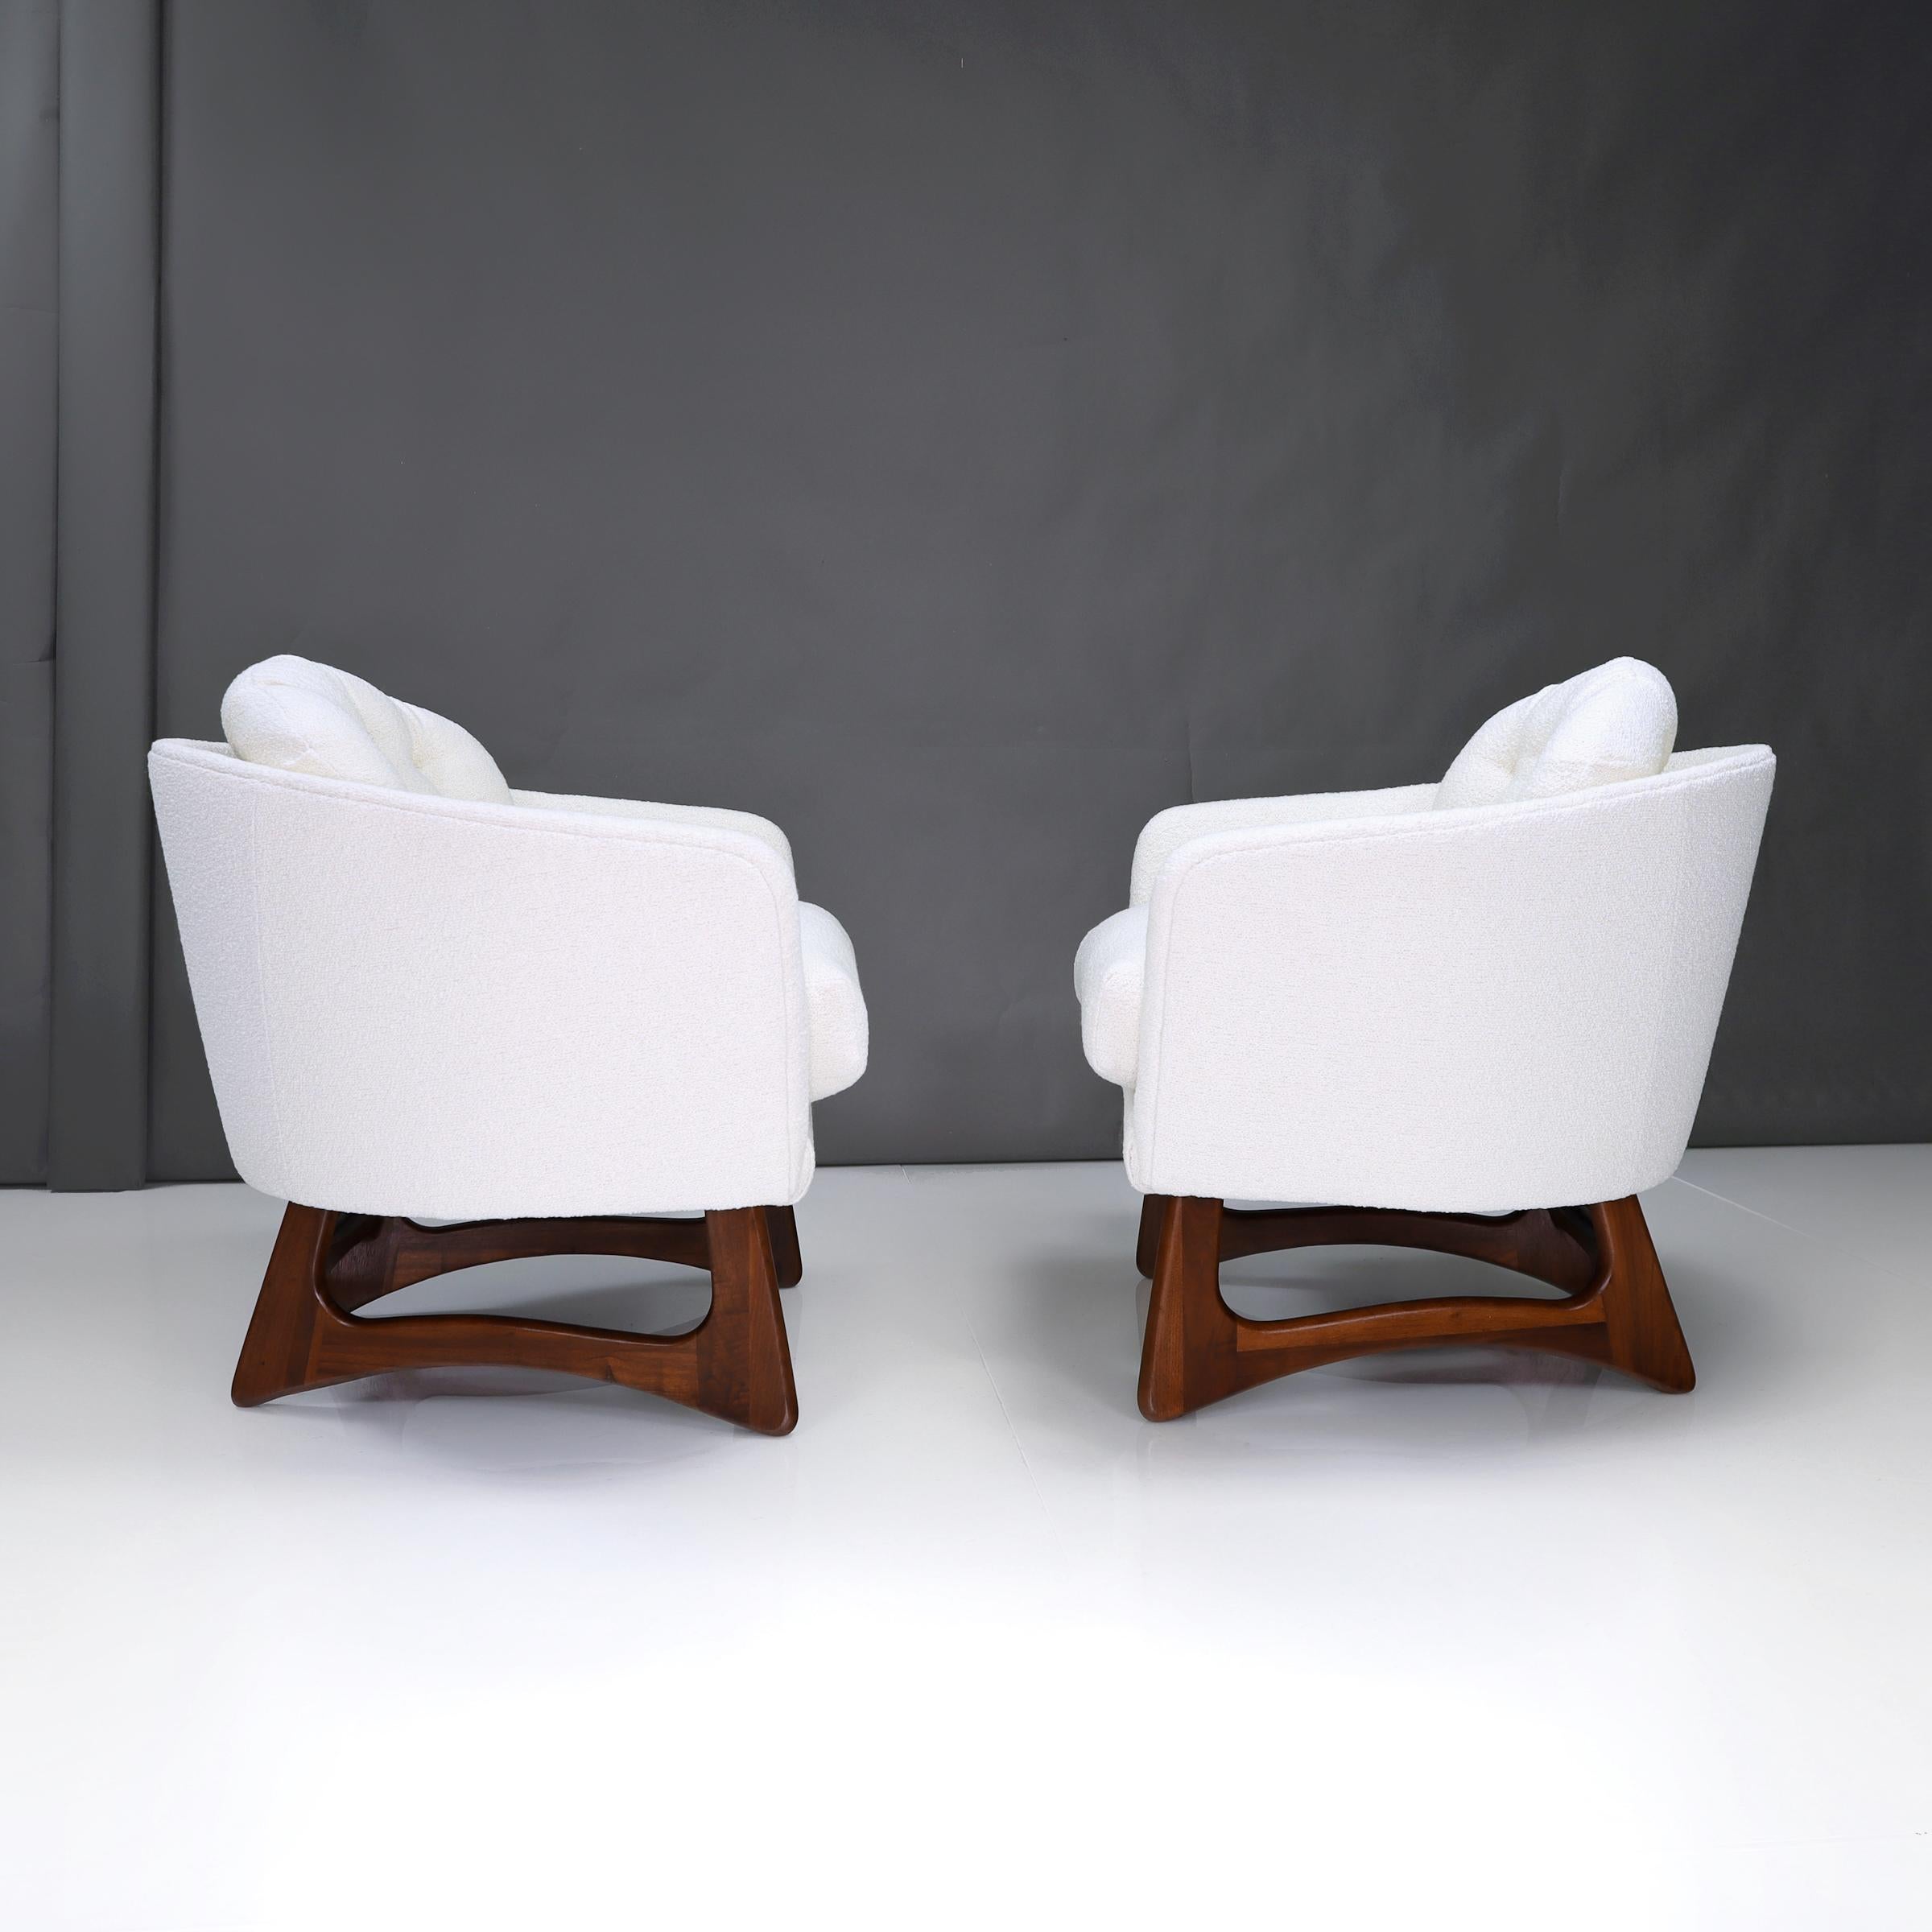 American 1960s Adrian Pearsall for Craft Associates Barrel Chairs - A Pair For Sale